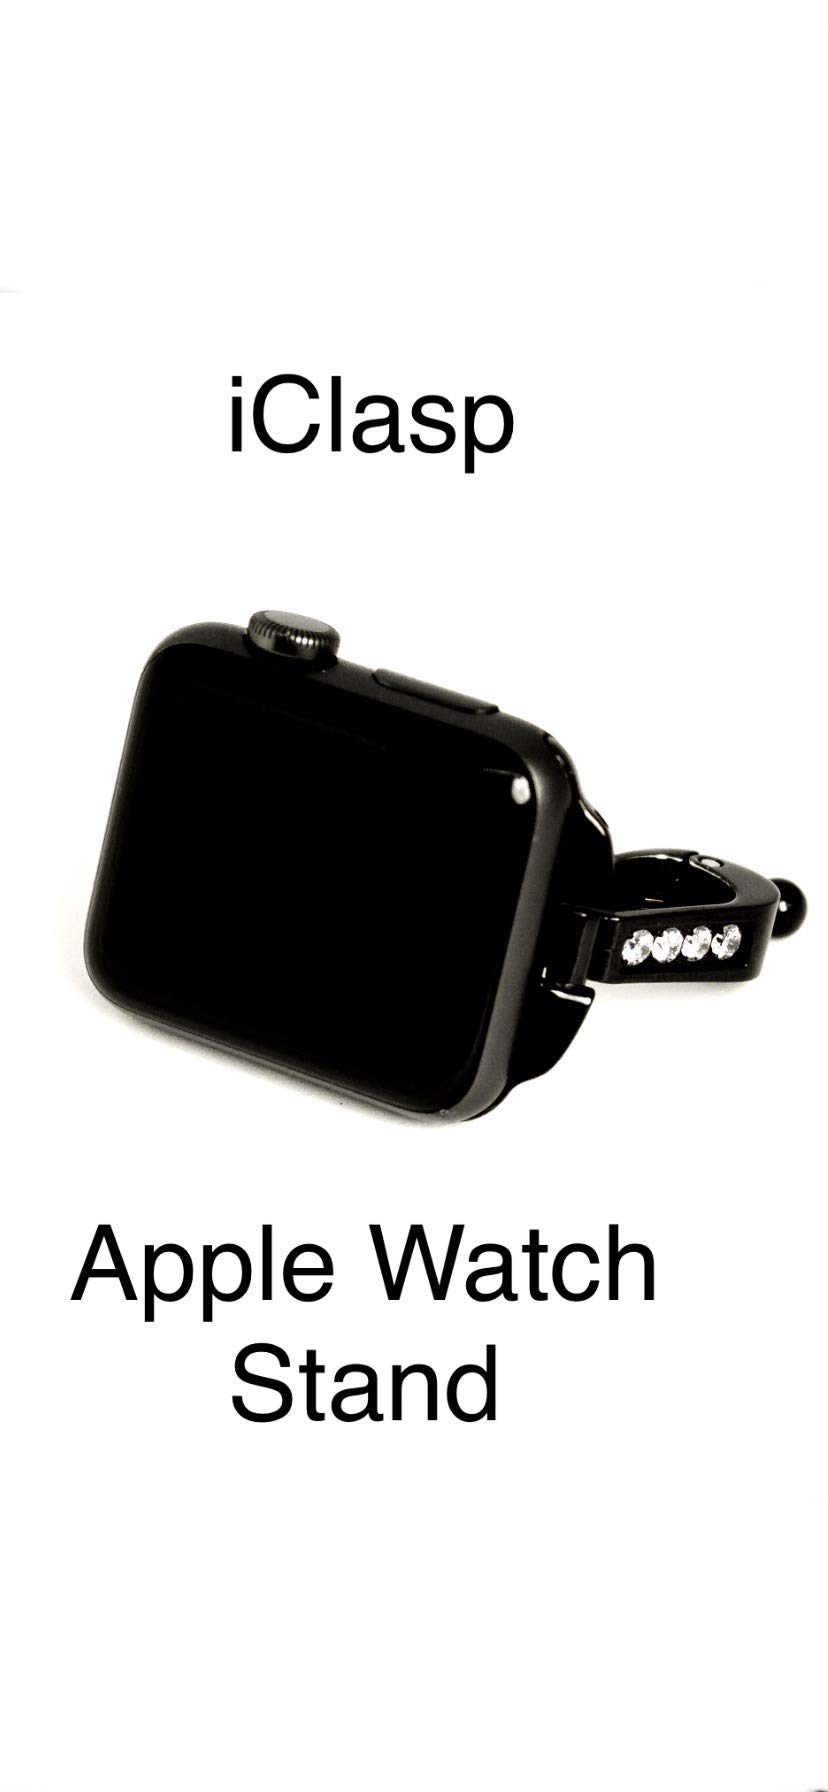 iClasp - Pendant Adapter Accessory Compatible With Apple Watch - Wear with Included 30